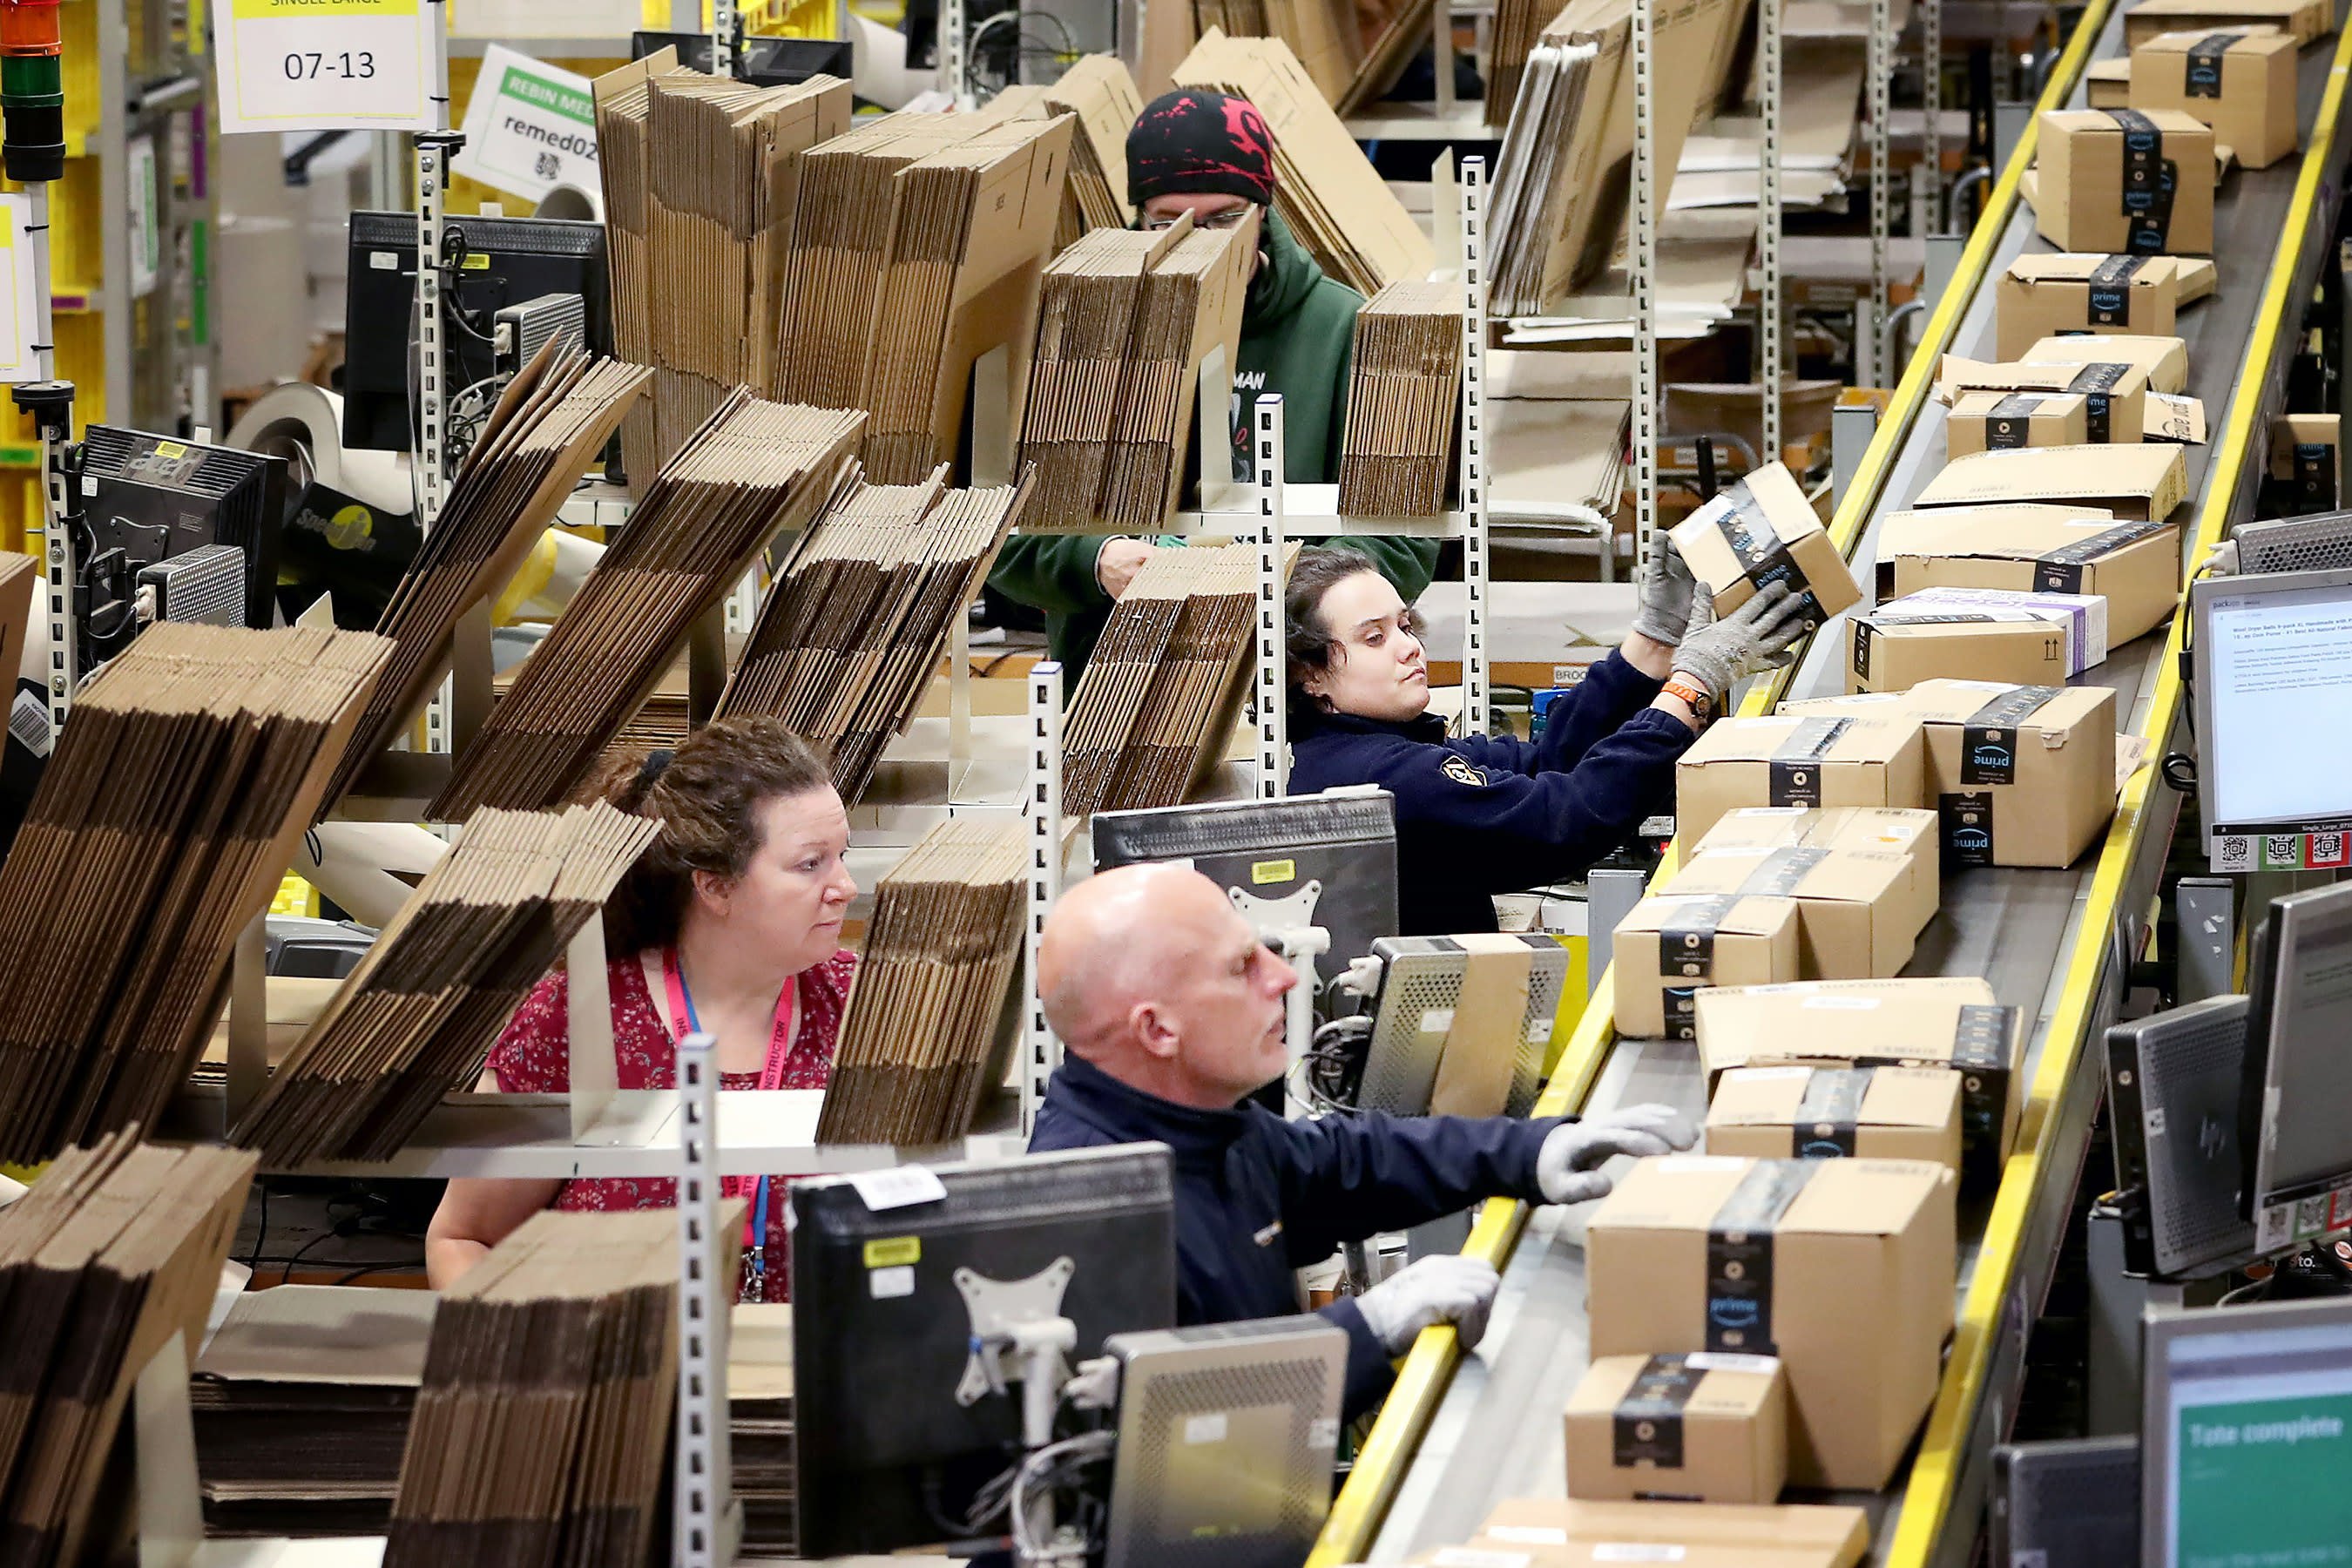 Amazon Increases Minimum Wage for U.S. Employees to 15 an Hour 'We